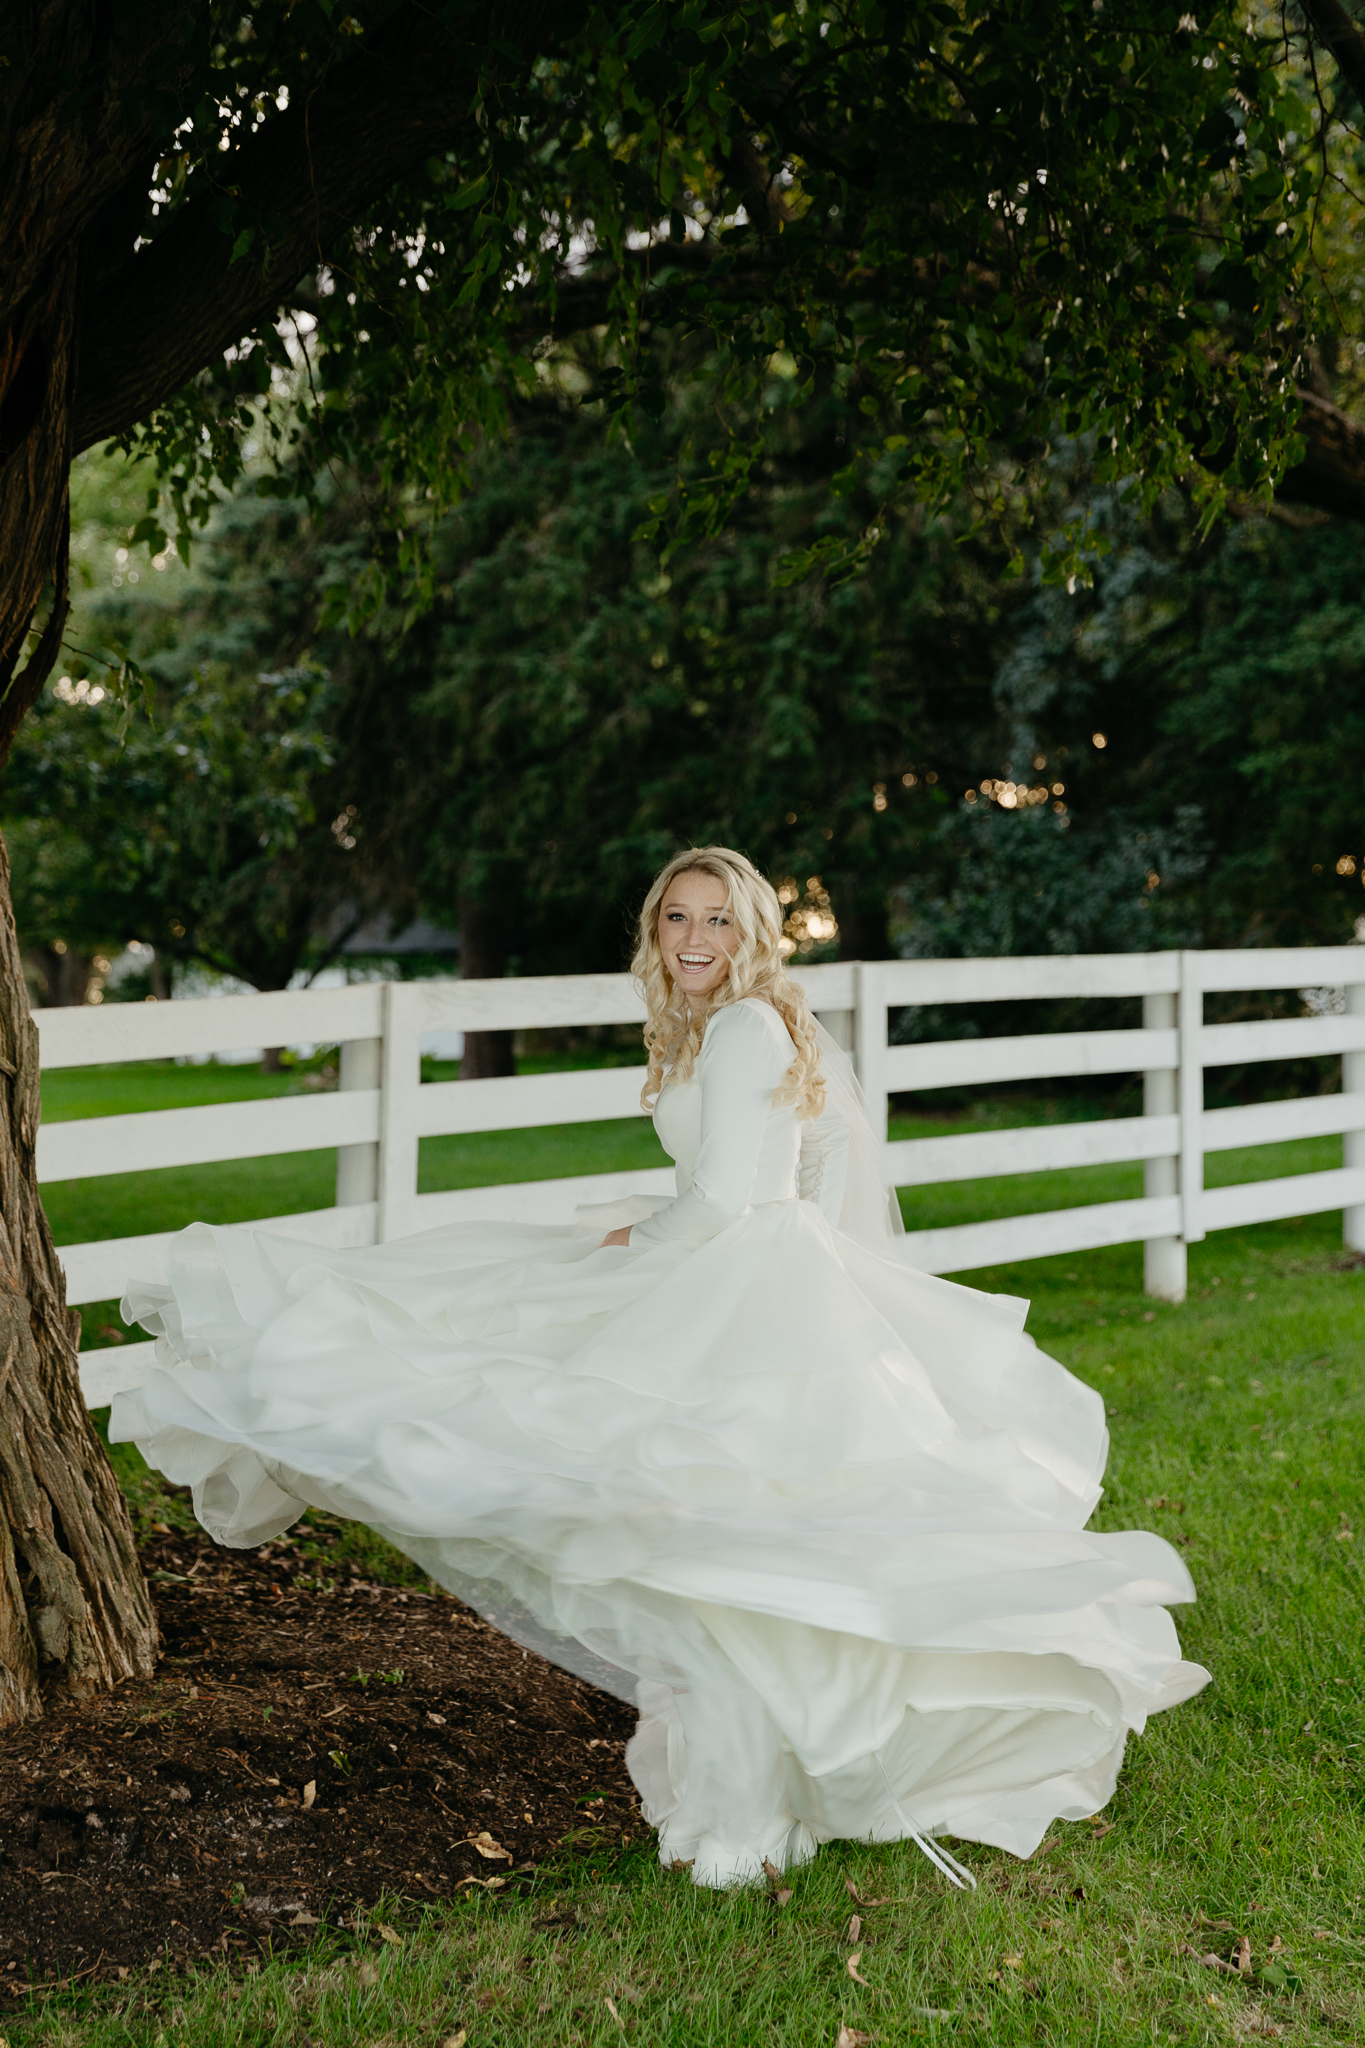 Bride twirls dress with white boots and laughs, underneath a large tree and next to a horse pasture